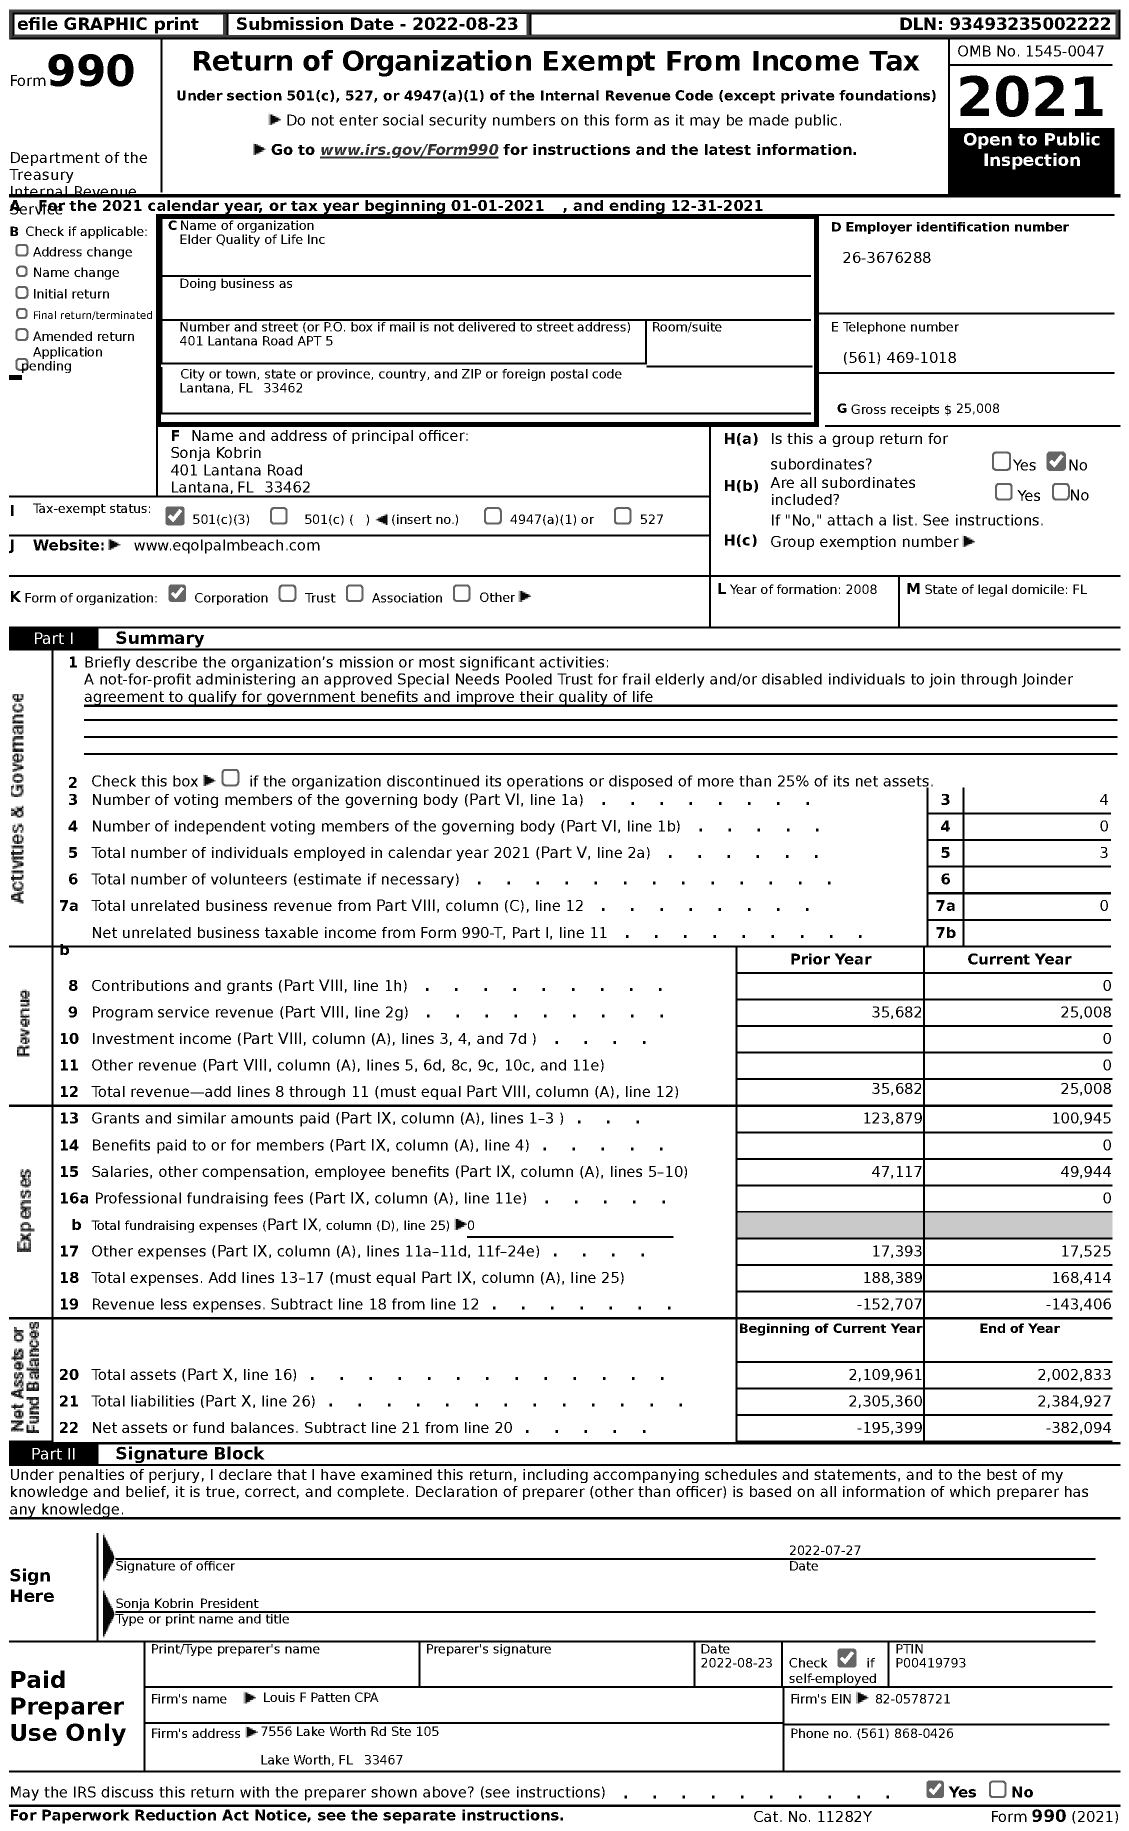 Image of first page of 2021 Form 990 for Elder Quality of Life